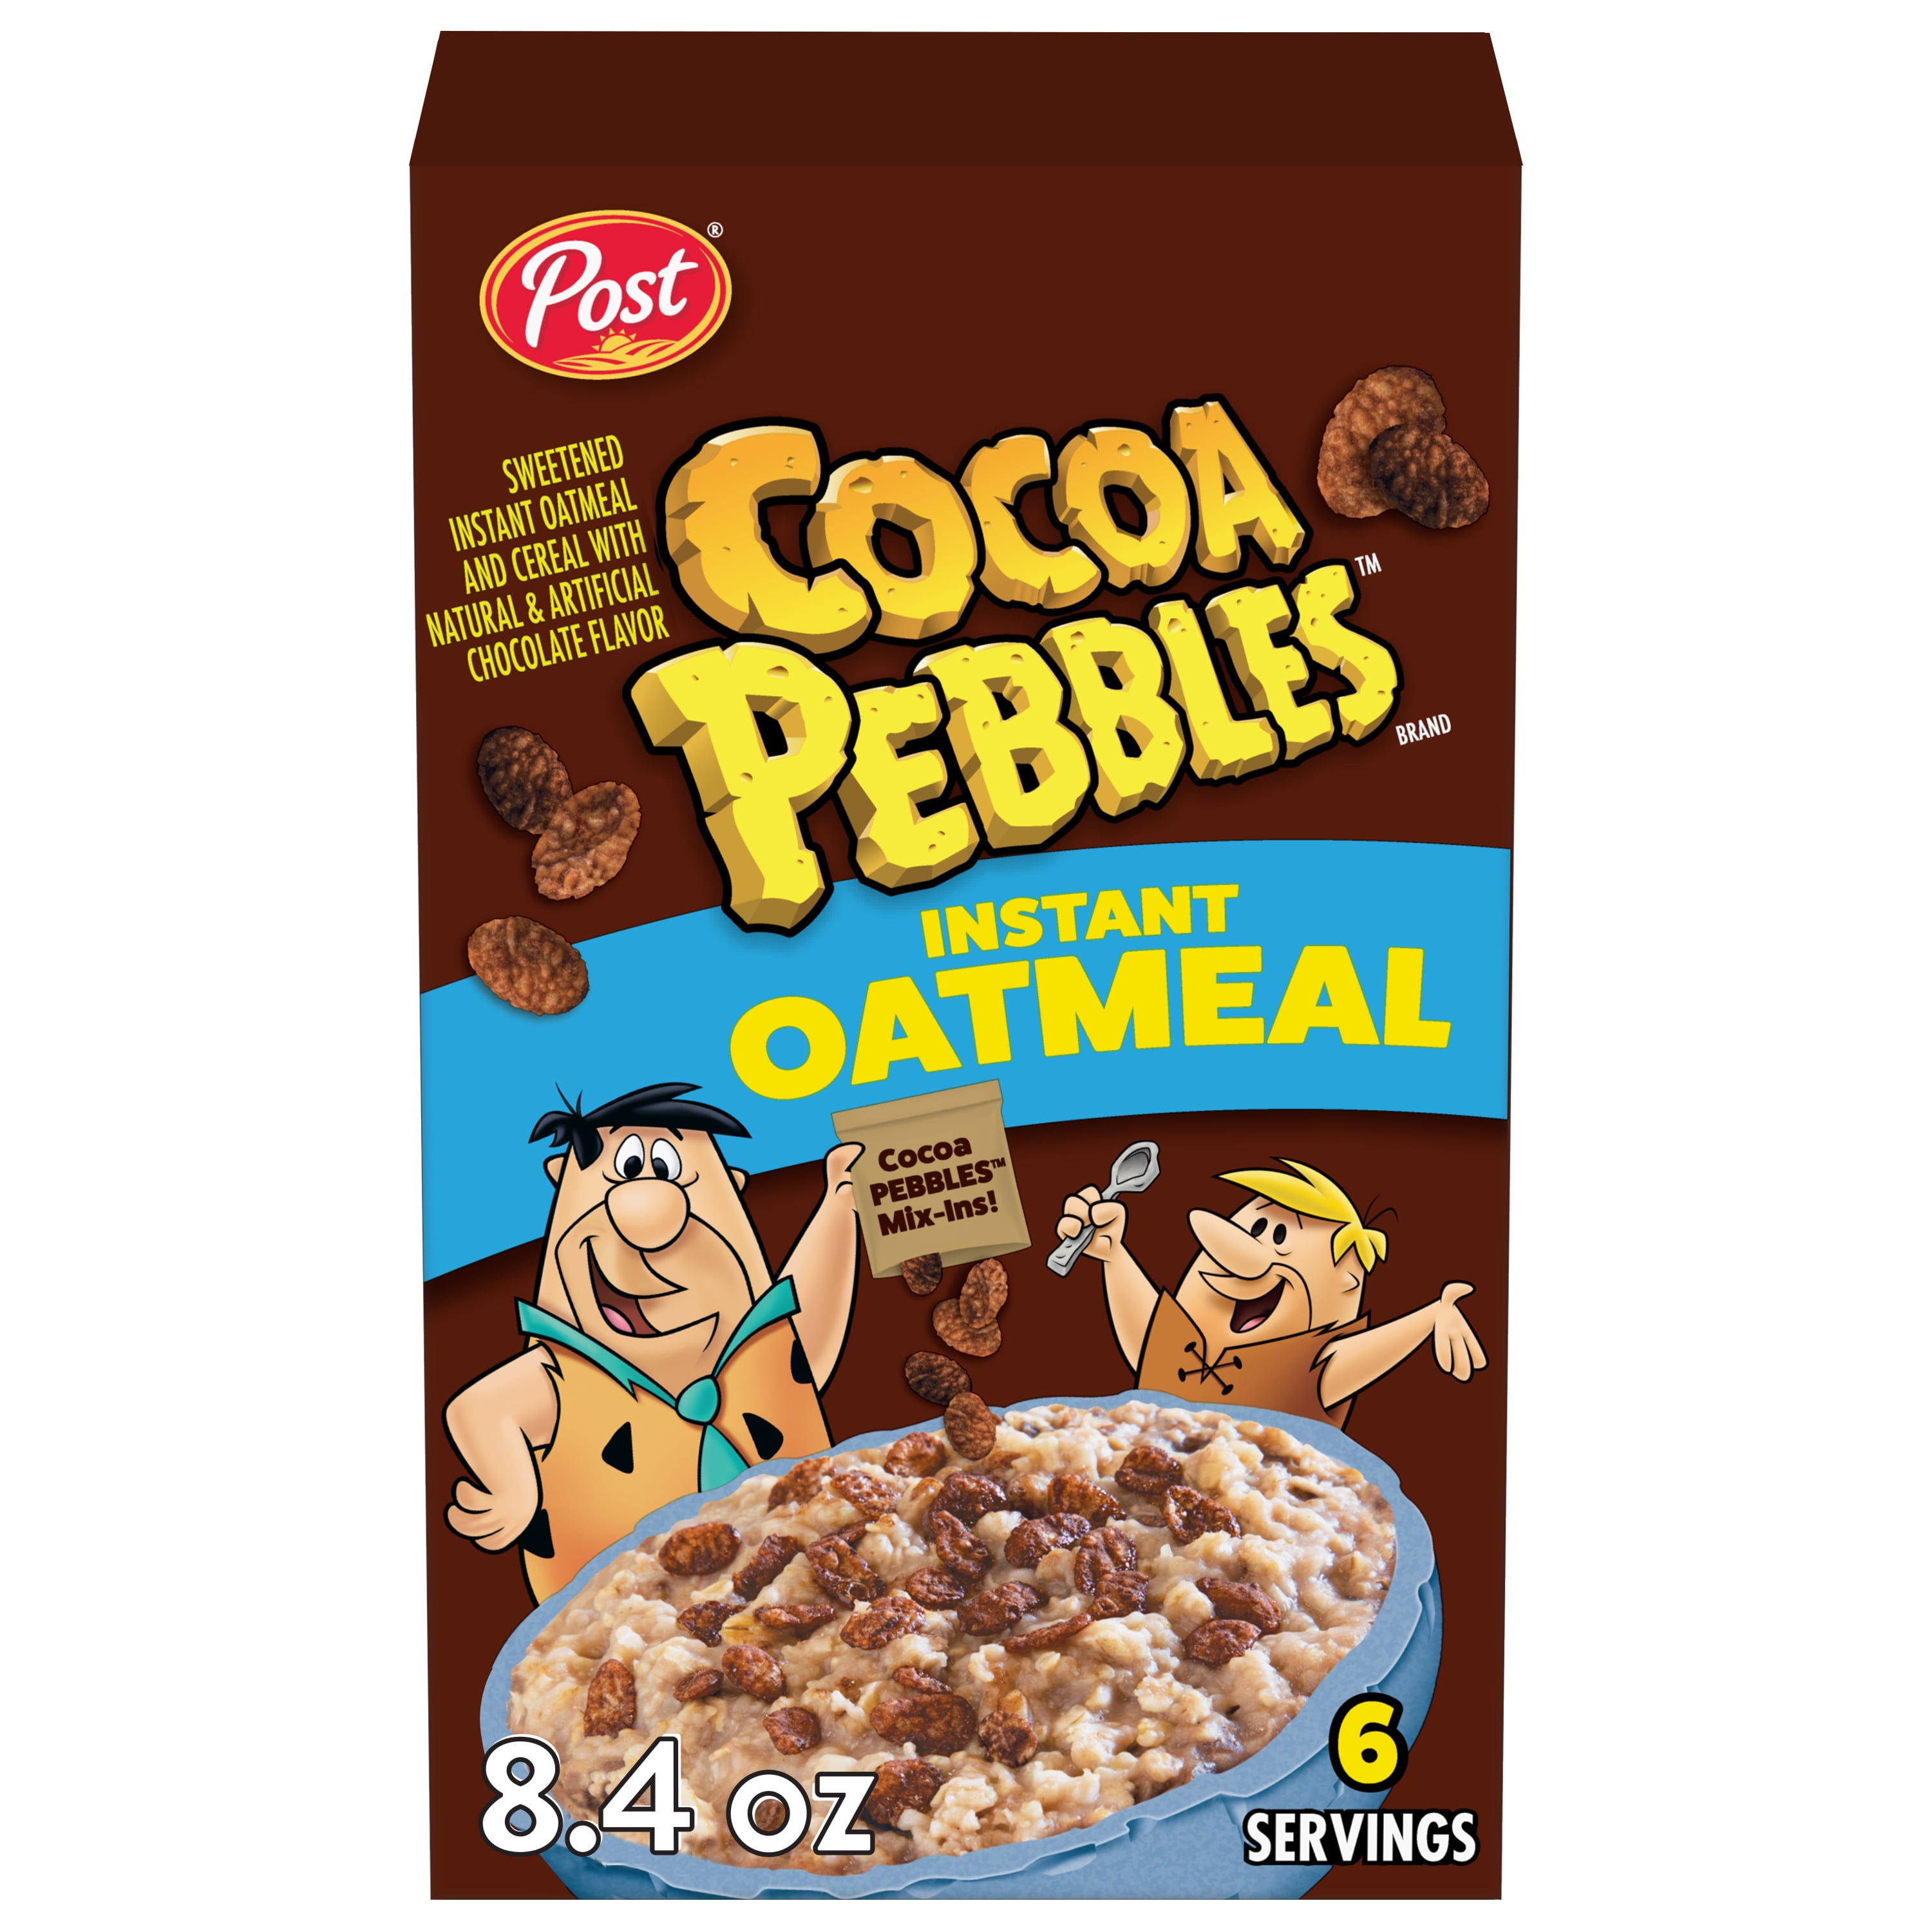 New Post Cocoa PEBBLES Instant Oatmeal for Kids, 6 Oatmeal Packets, 8.4oz